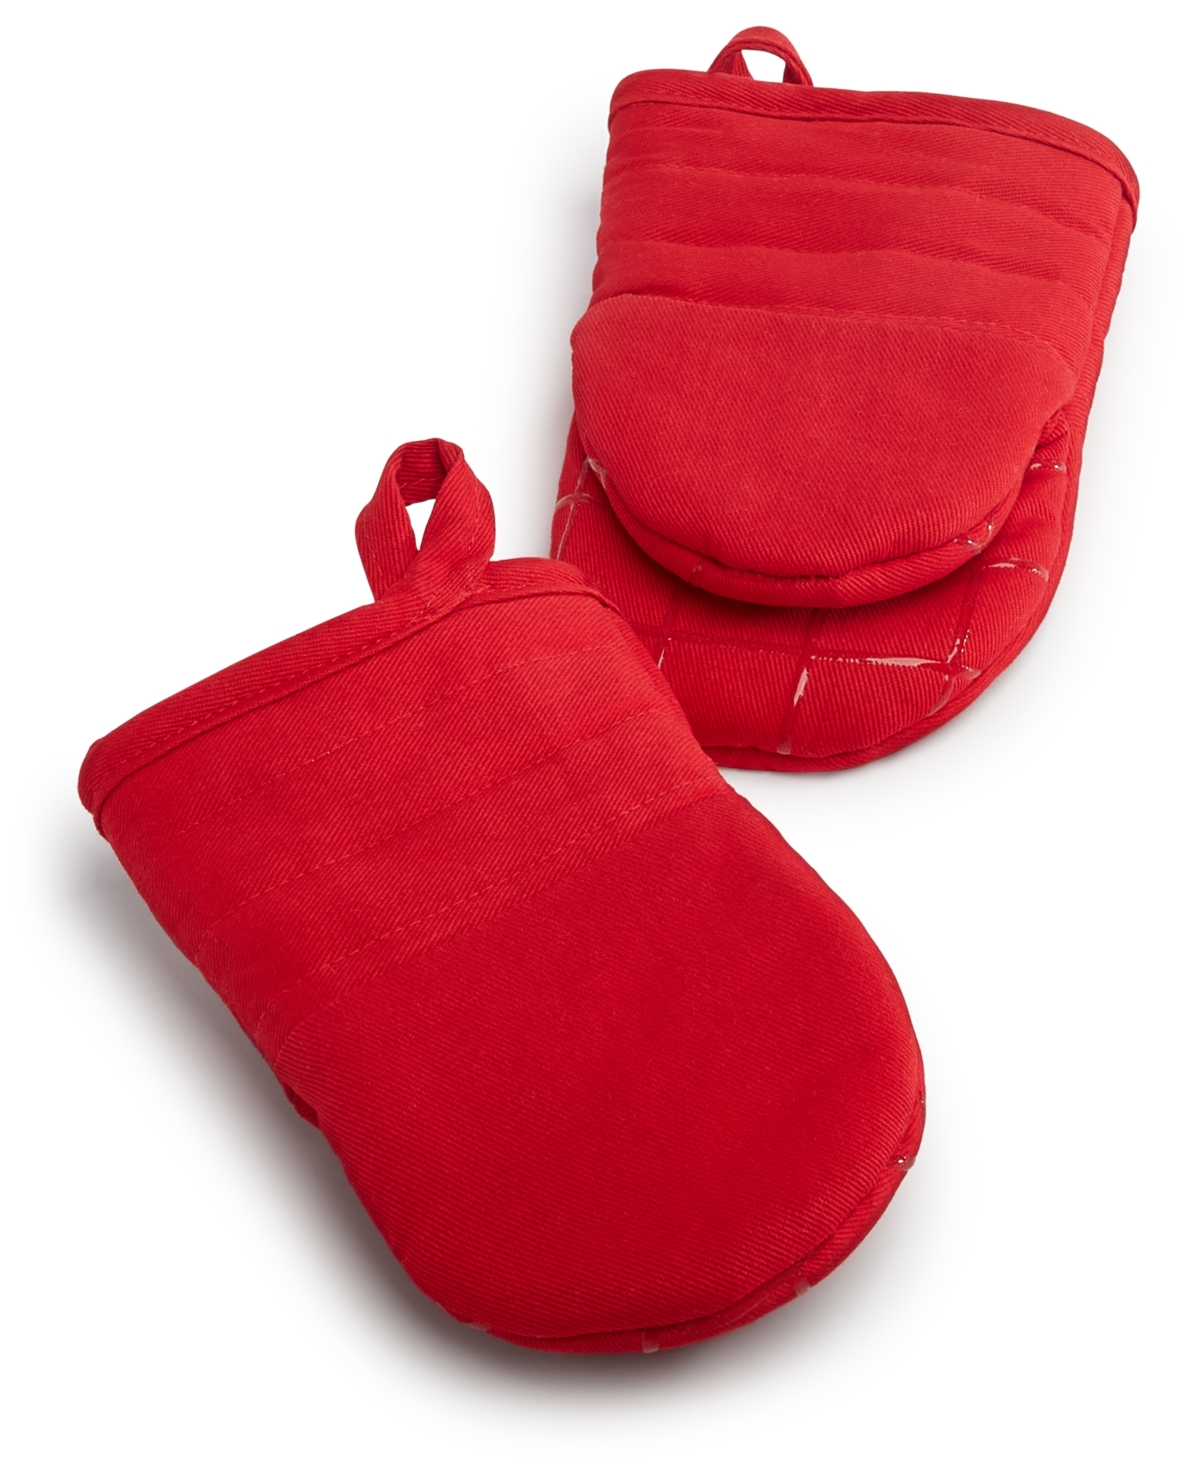 Core 2-Pc. Cotton Red Mini Mitts Set Created for Macy's